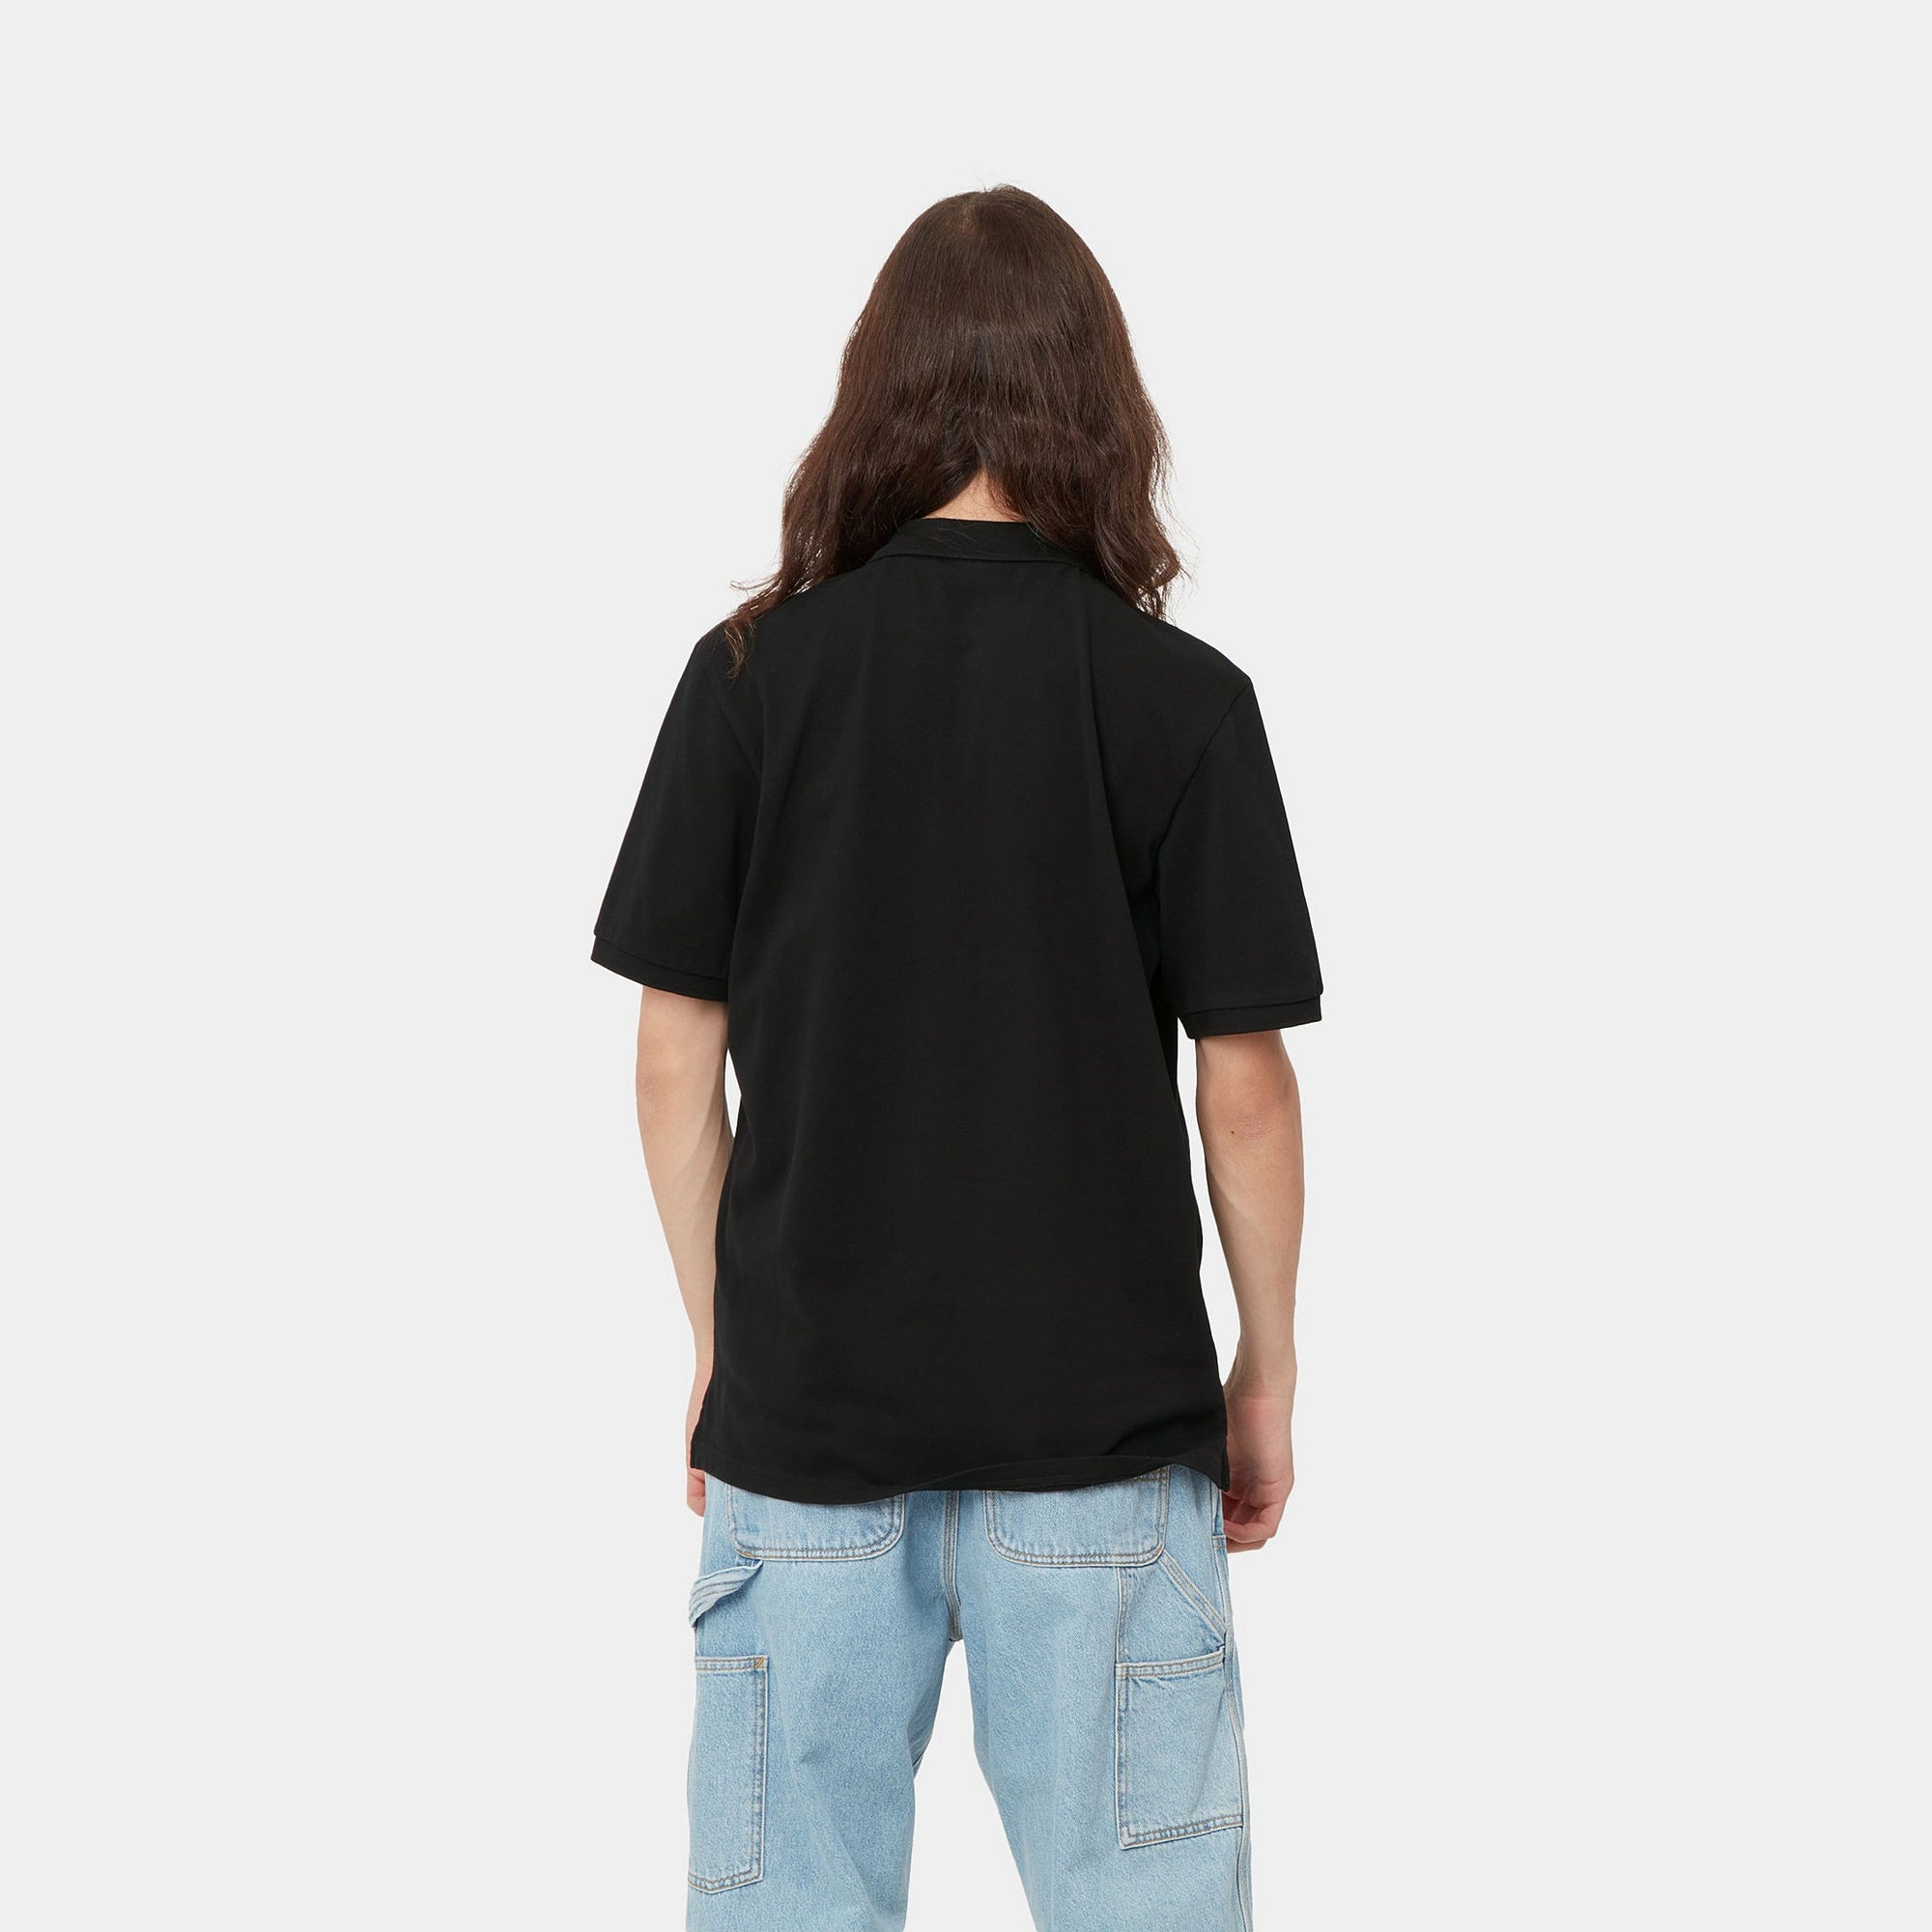 S/S CHASE PIQUE POLO / CARHARTT WIP / BLACK